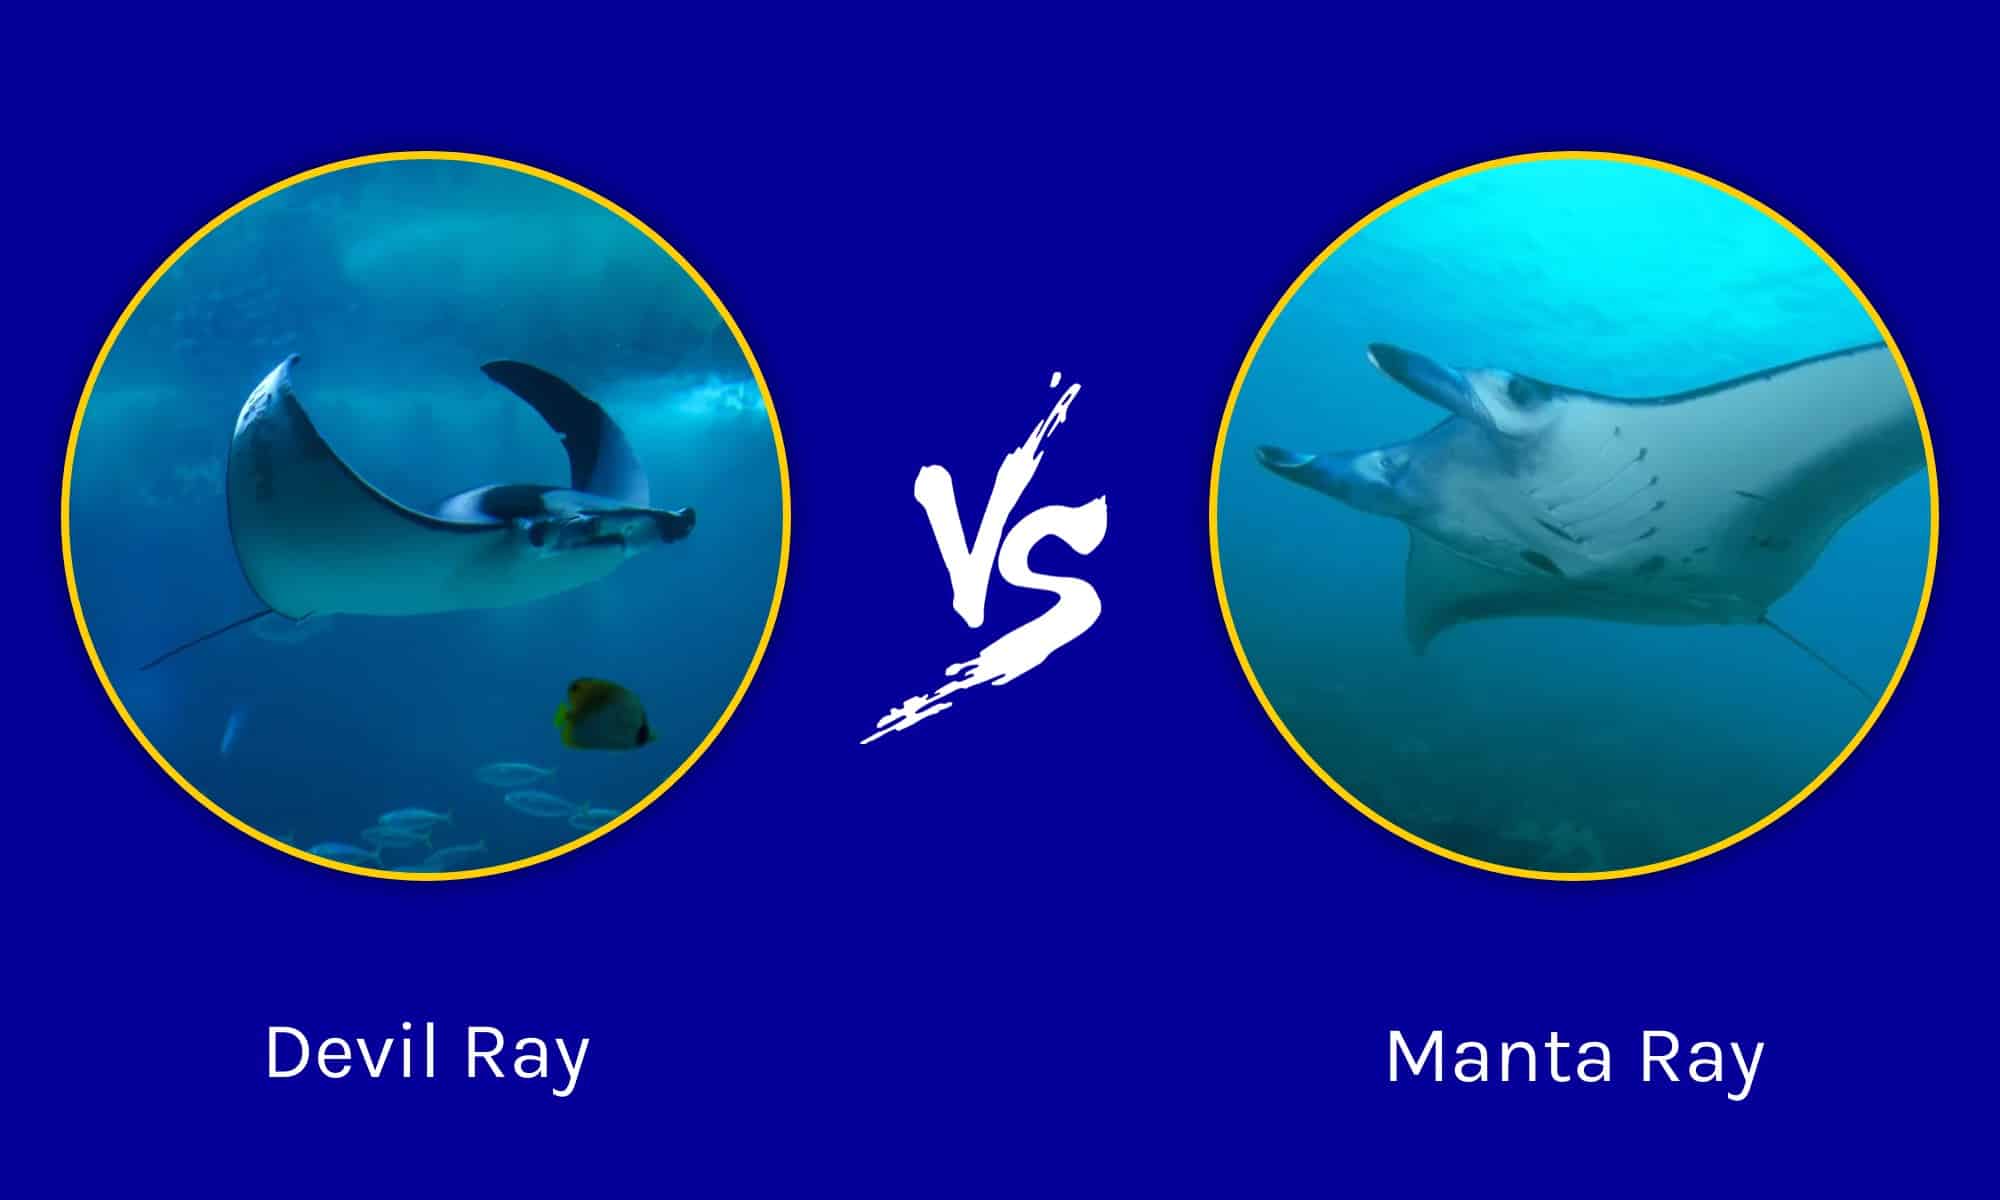 difference between a manta ray and sting ray